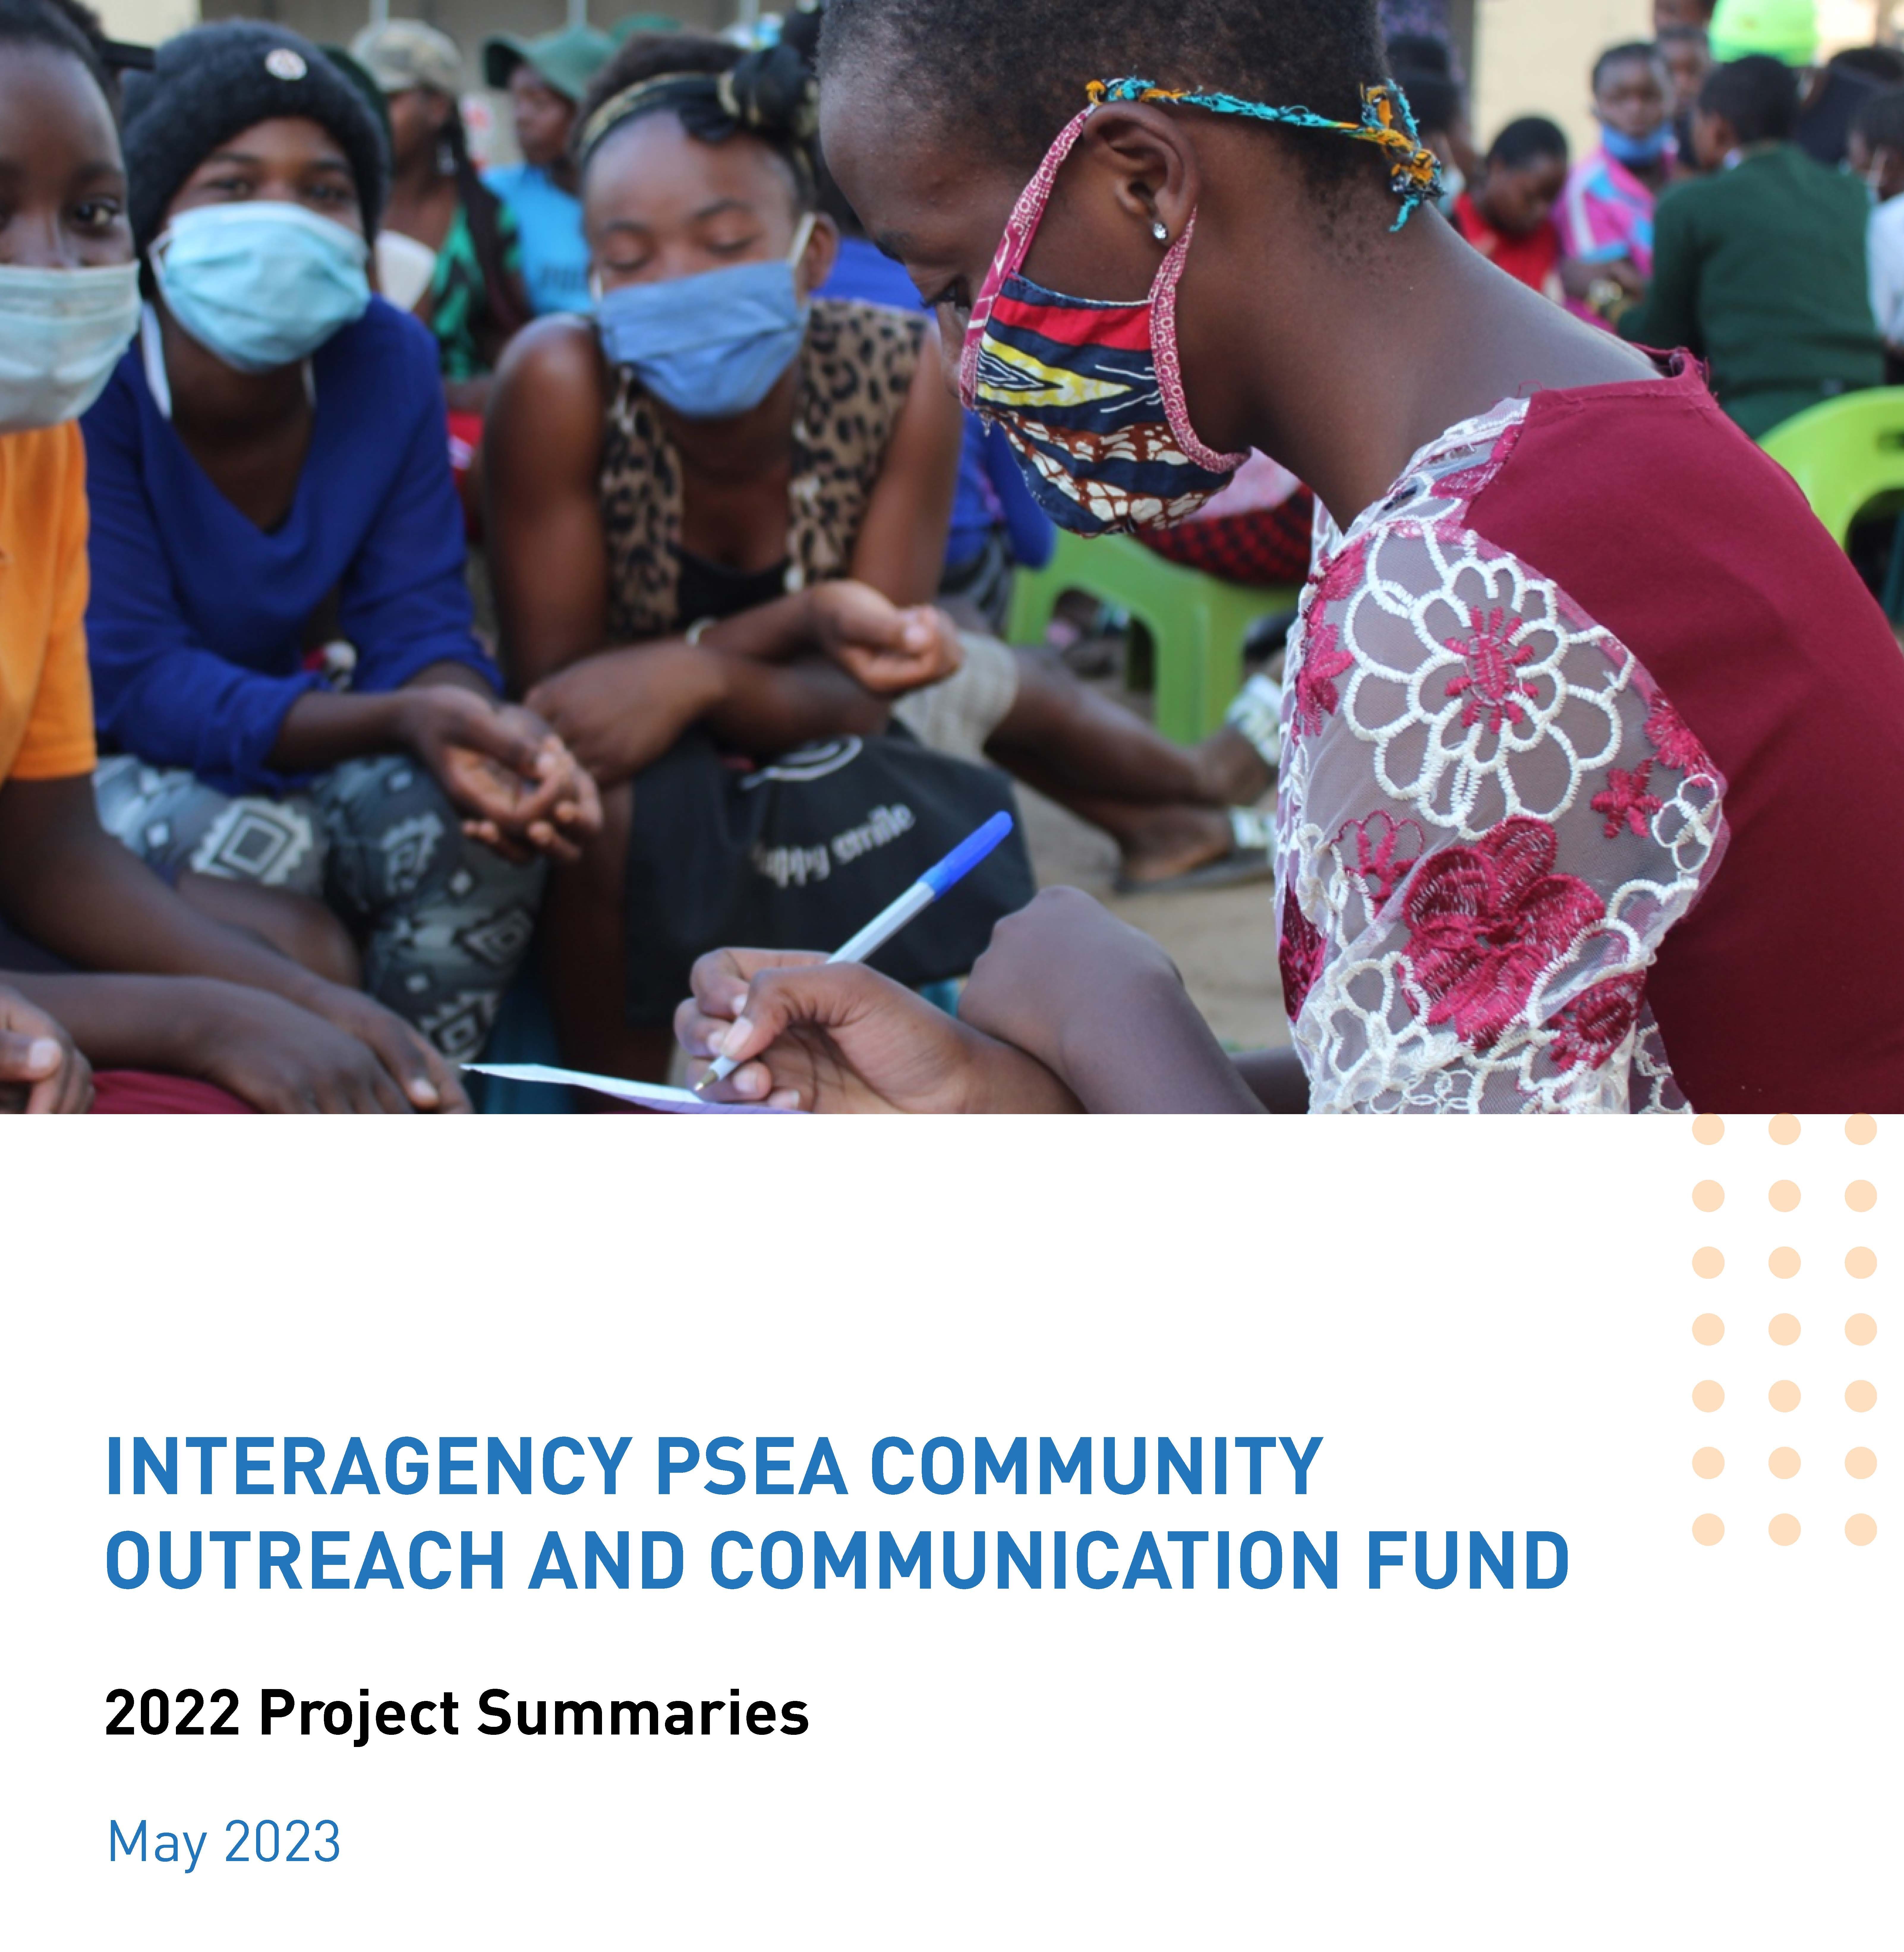 Interagency PSEA Community Oution Fund - 2022 PSEA Summaries 2